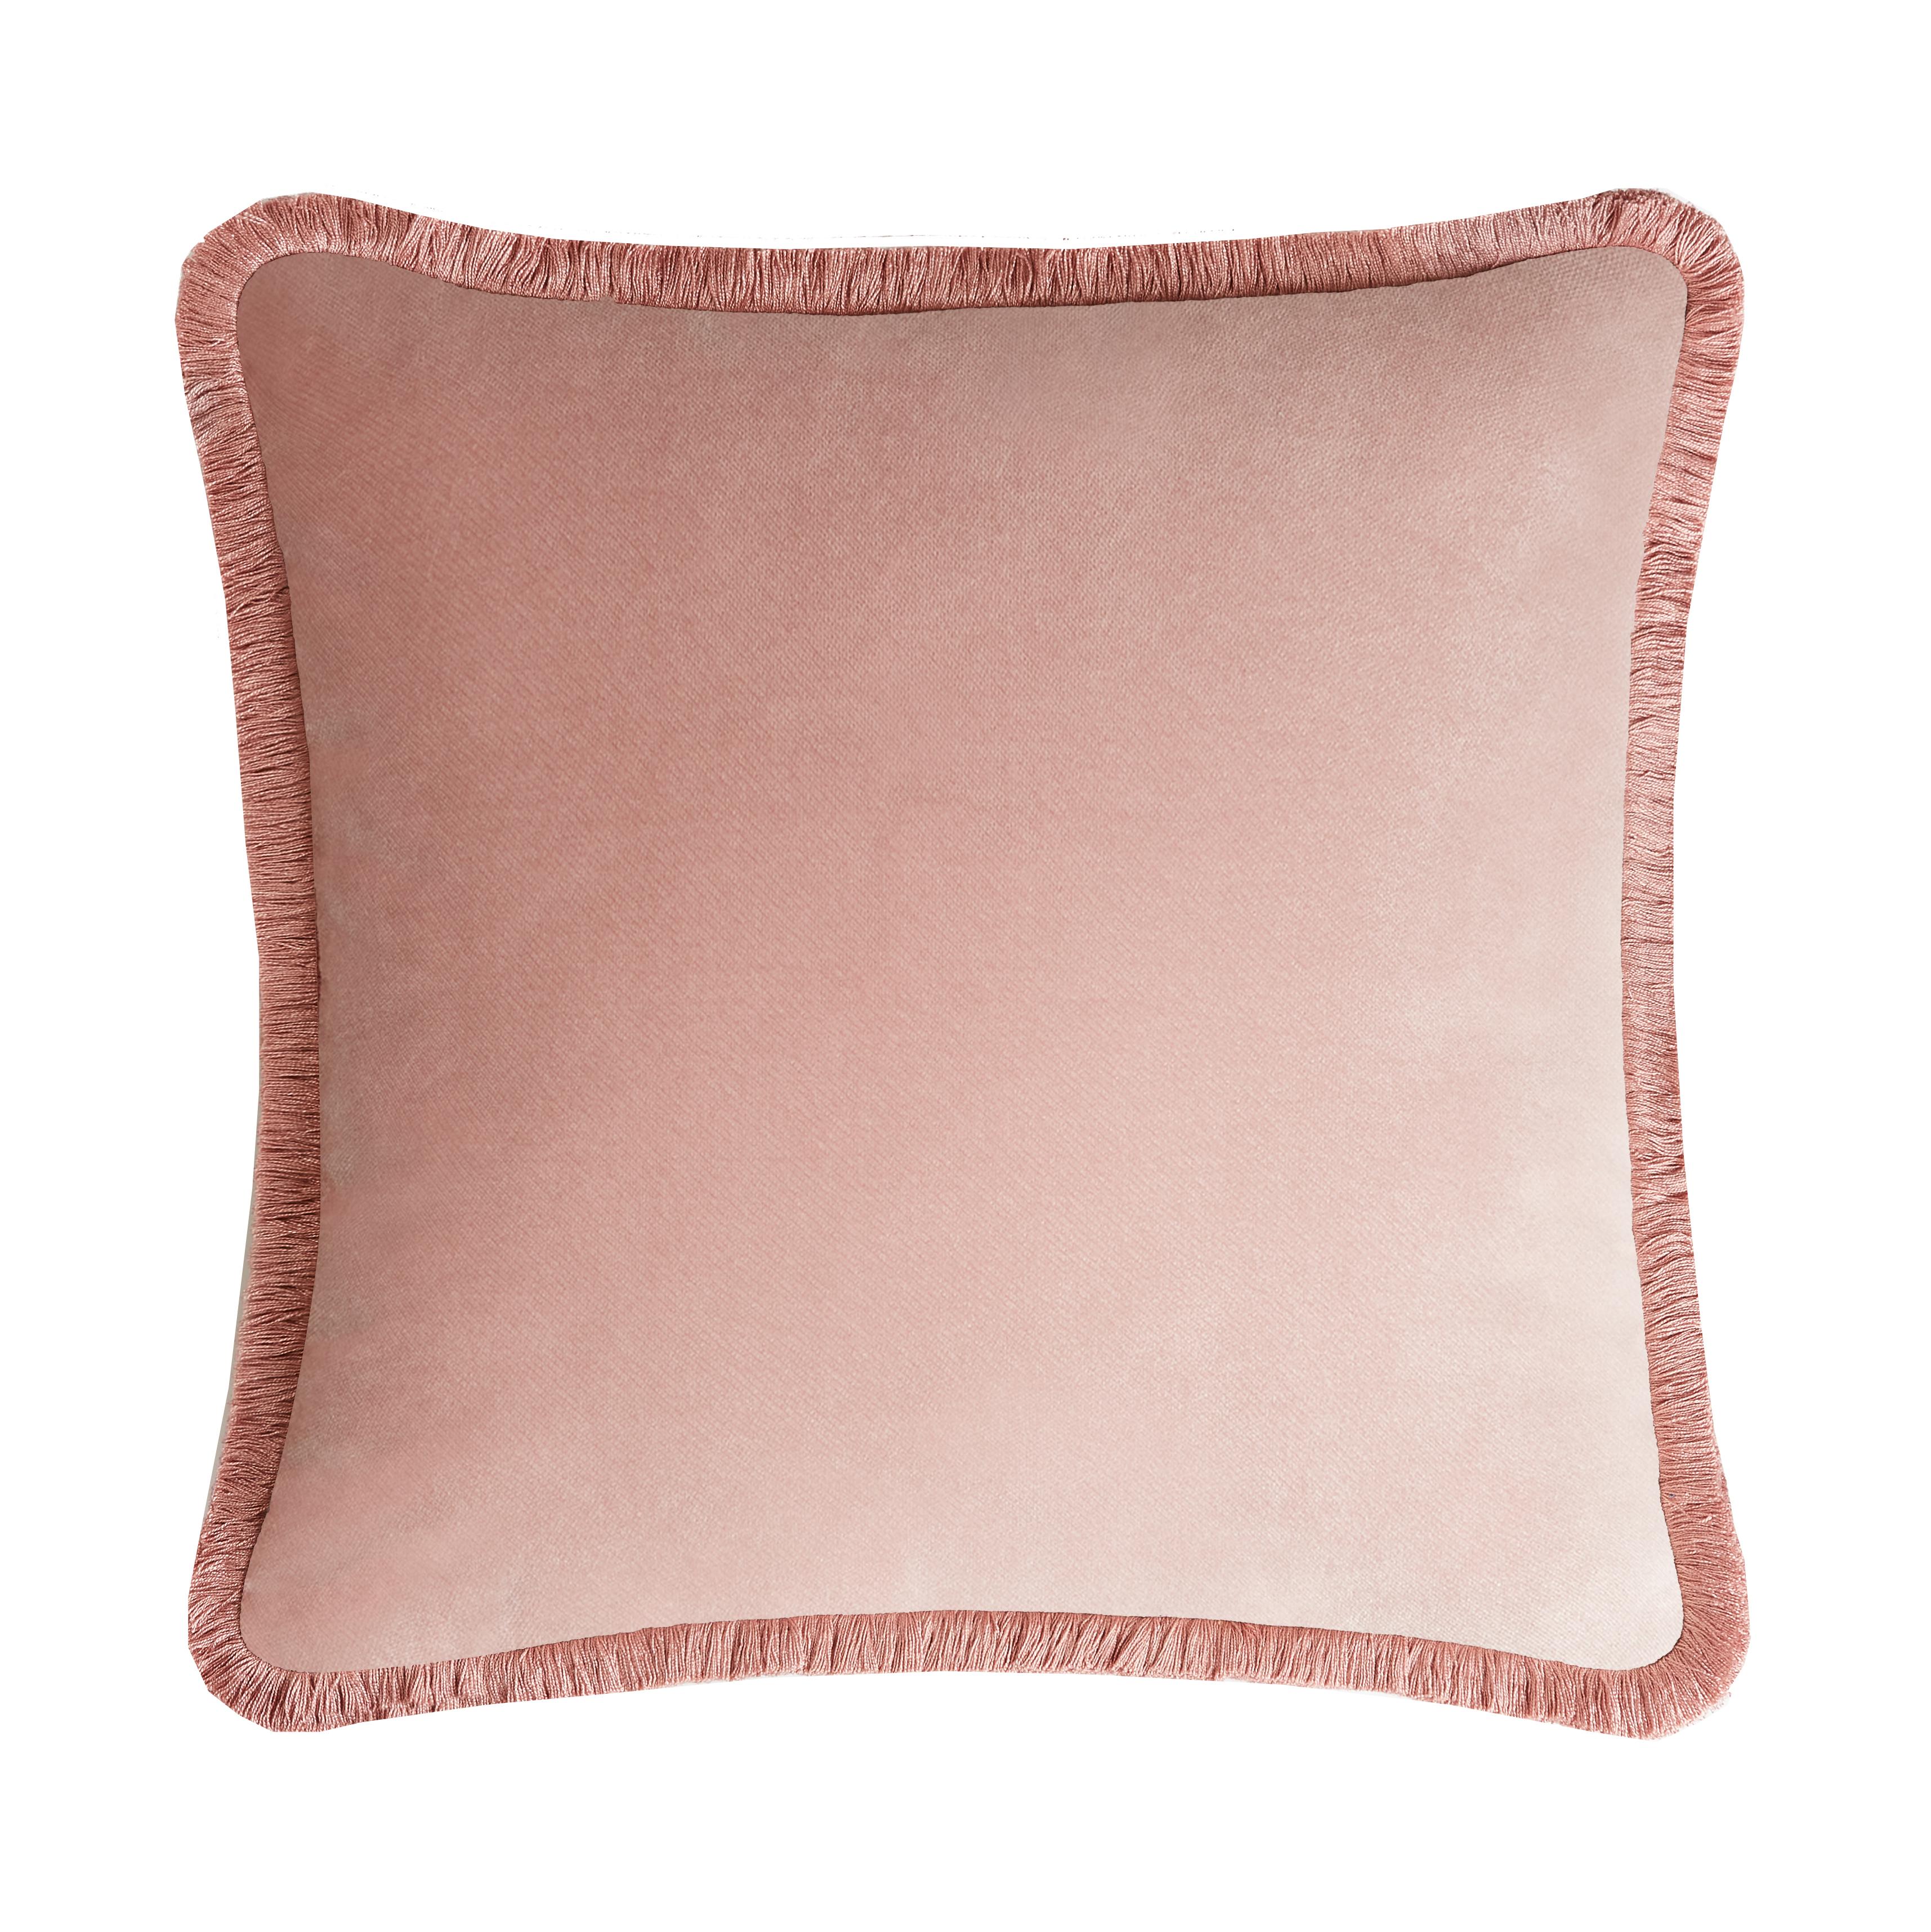 This exquisite square cushion will suit any decor with its neutral tones and refined allure. Padded with polyester fiber, the velvet removable cover boasts an elegant white color accented with a border of light pink trimming, resulting in an